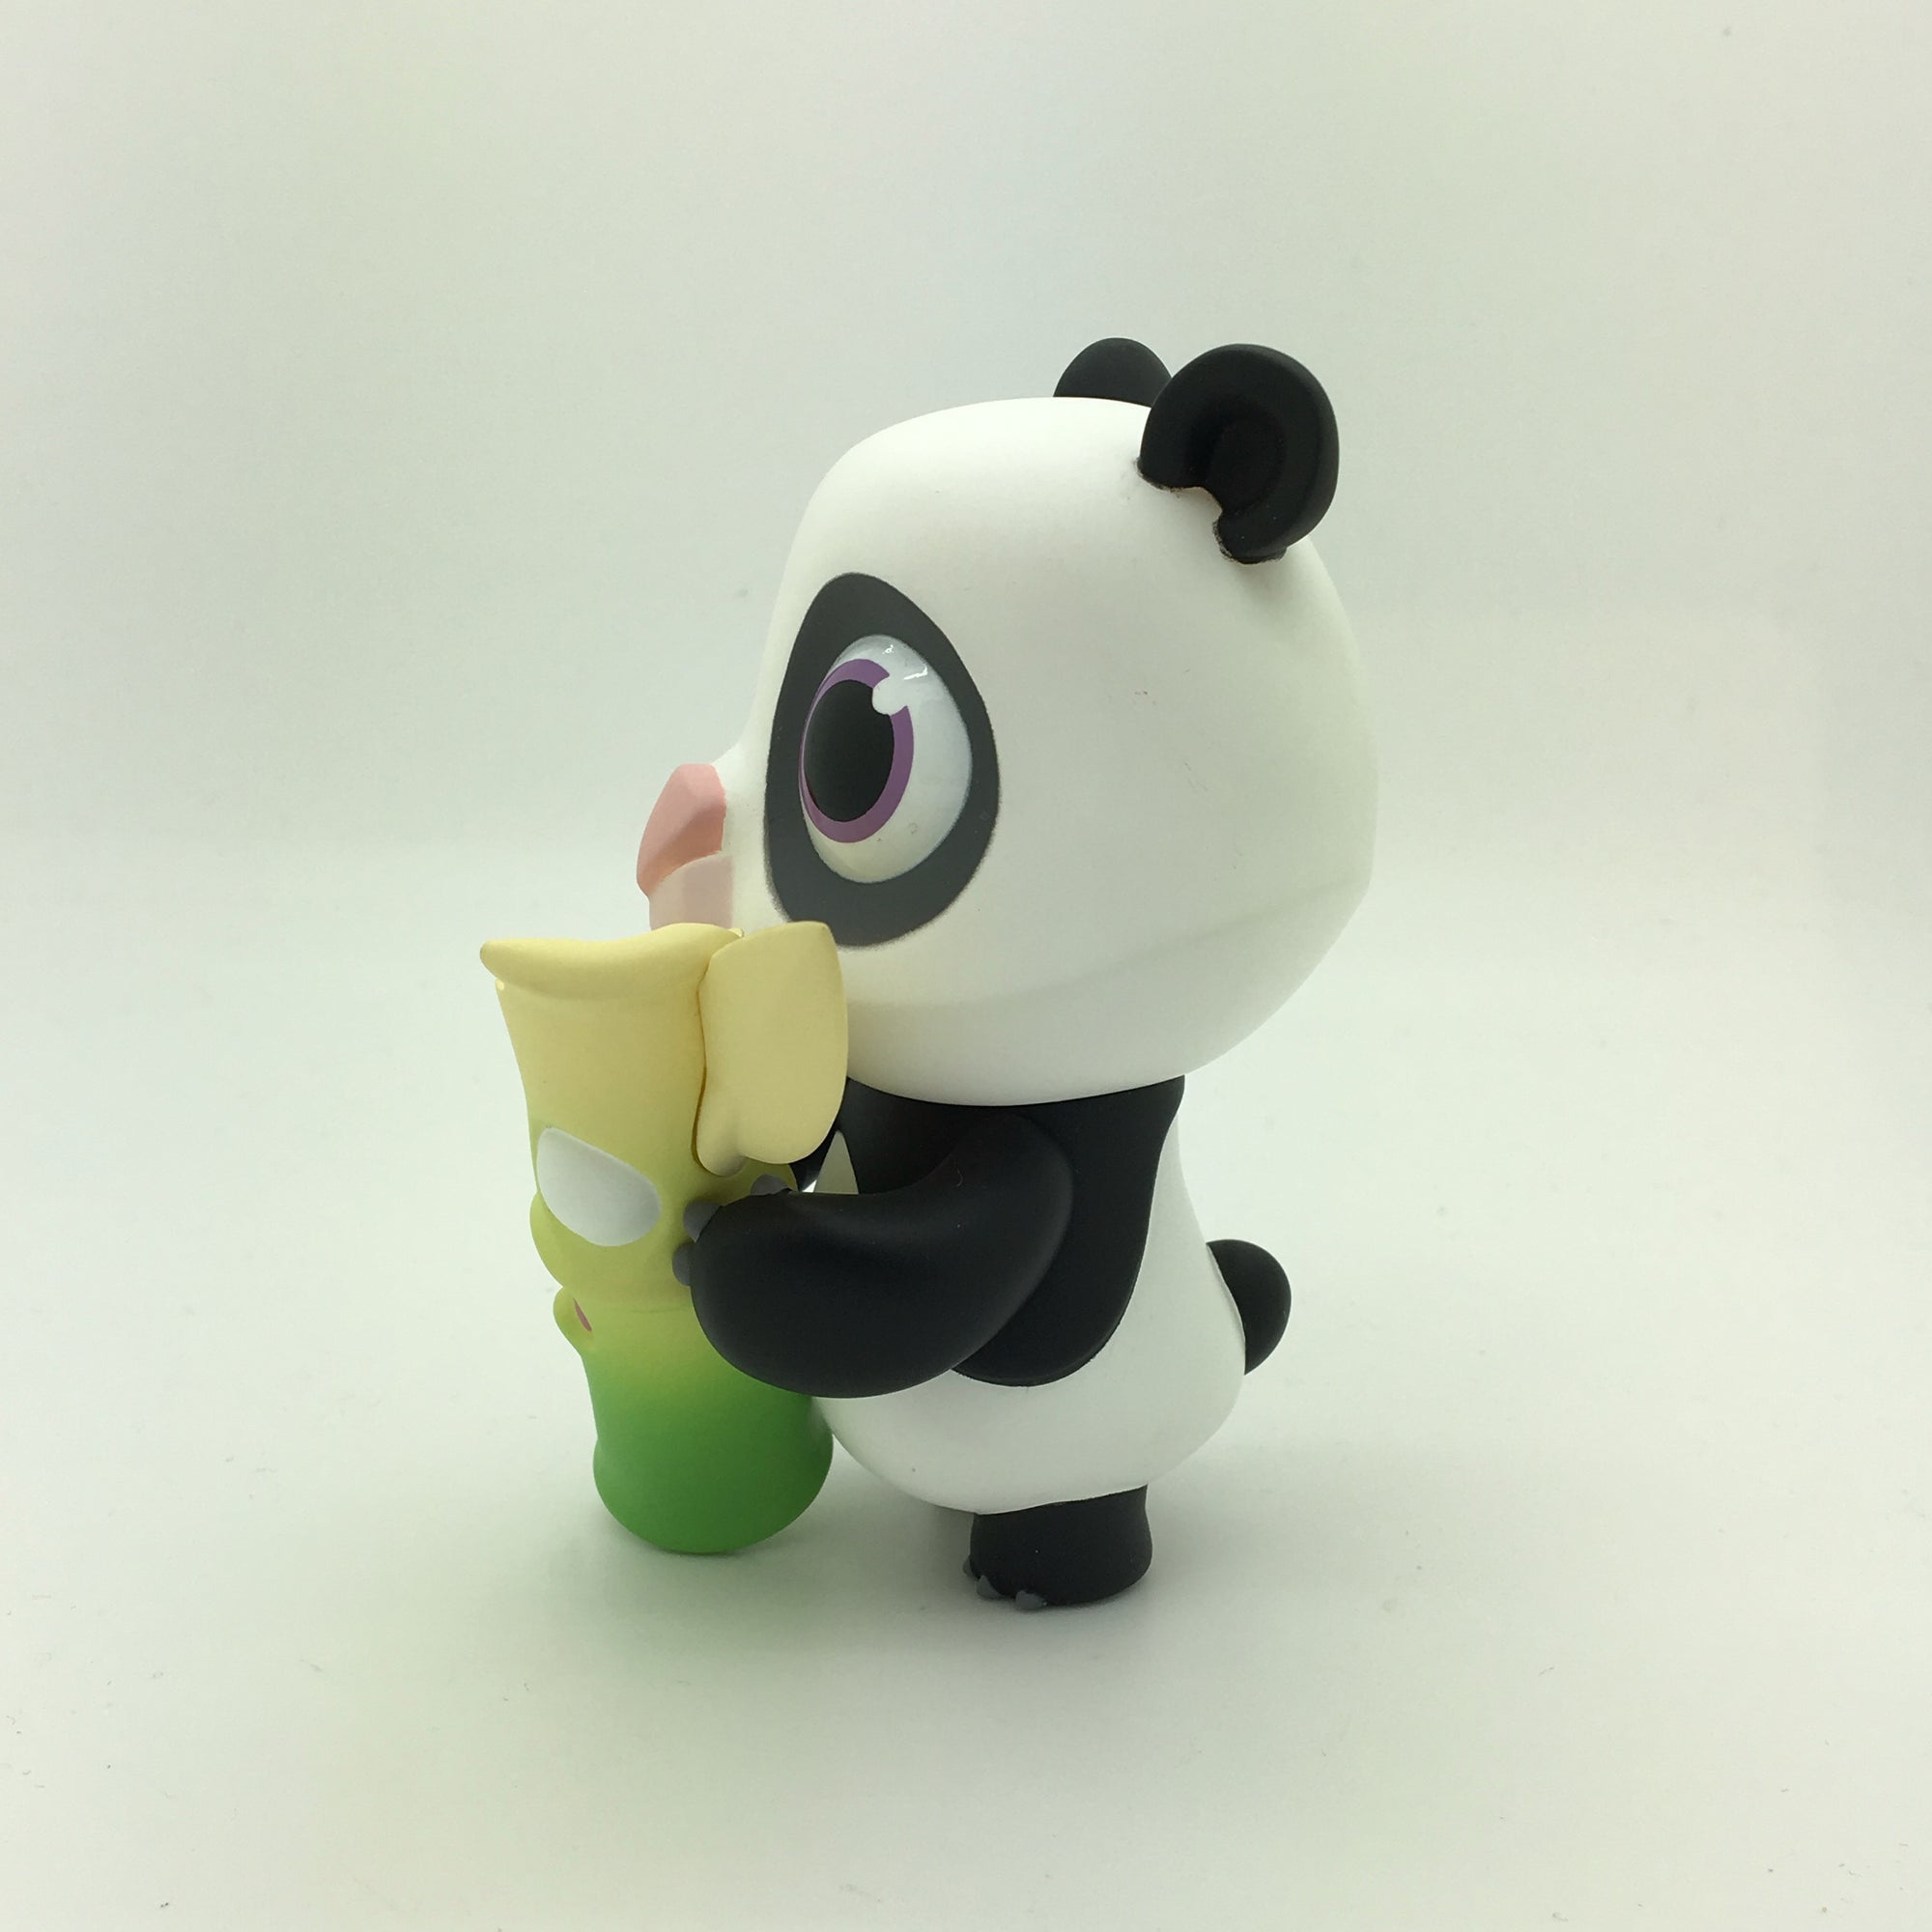 Pun Pun and Steamed Shoot by Coarse Toys